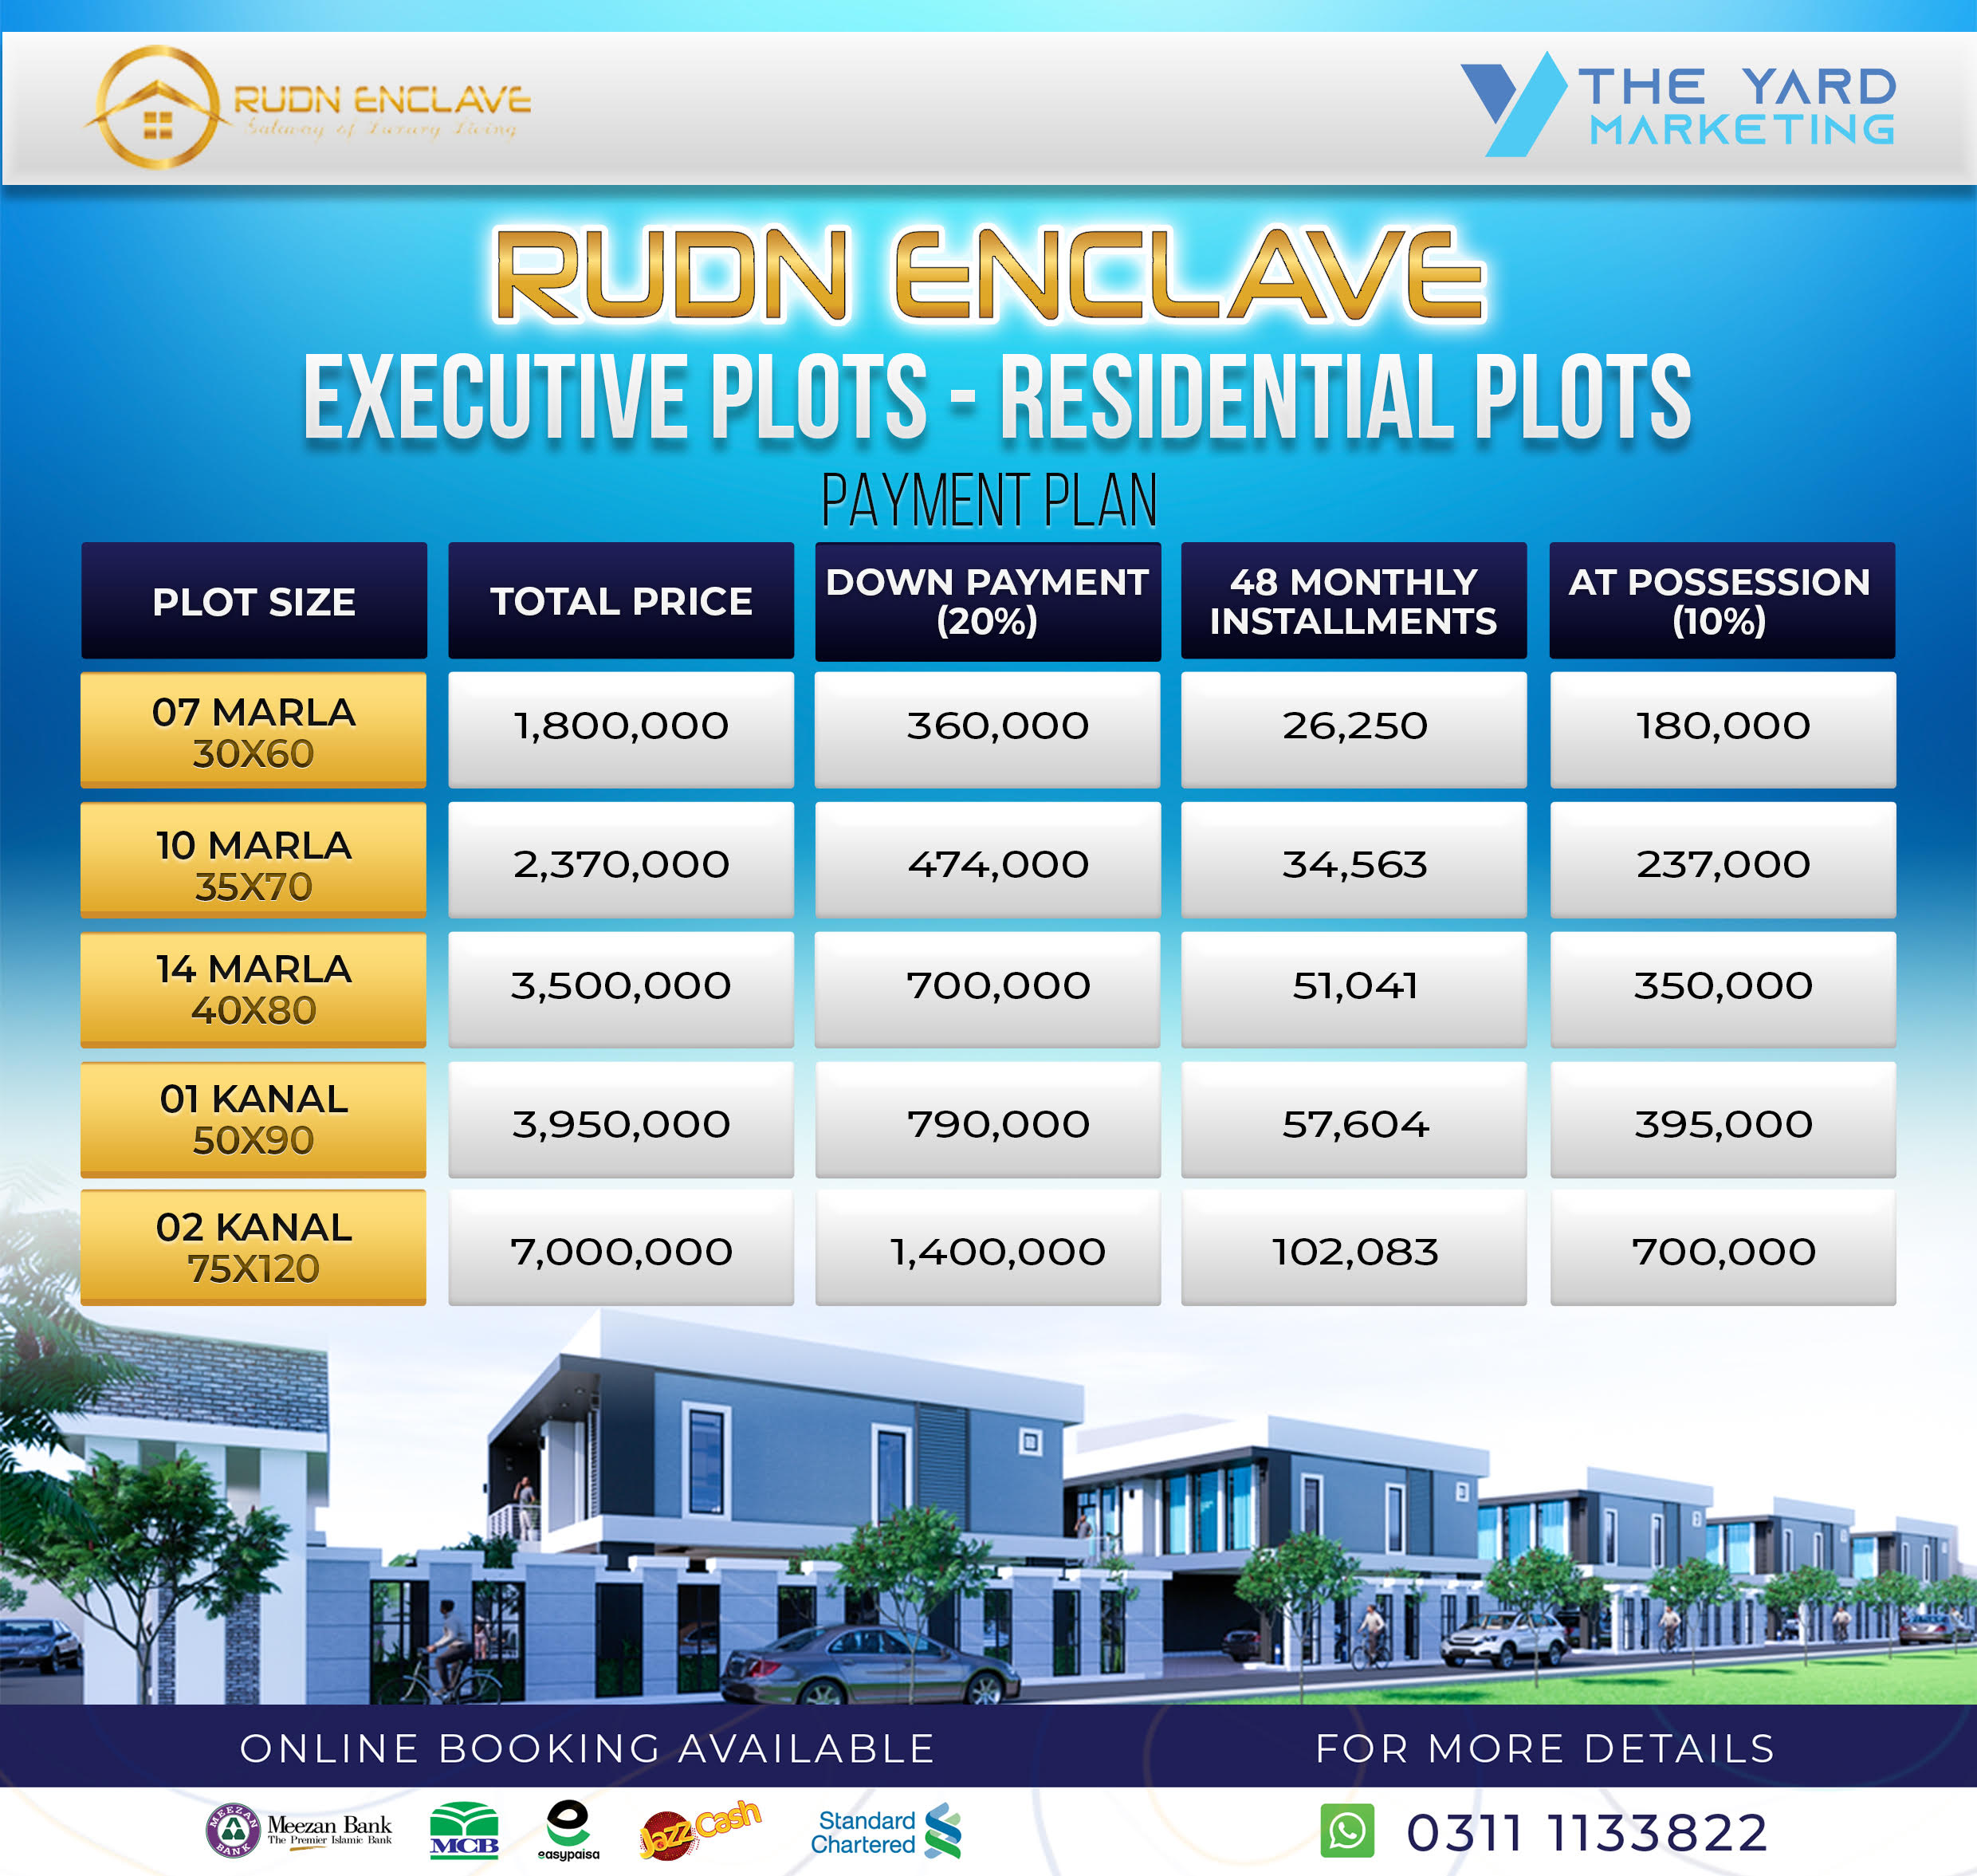 Why You Should Invest In Rudn Enclave - TYM